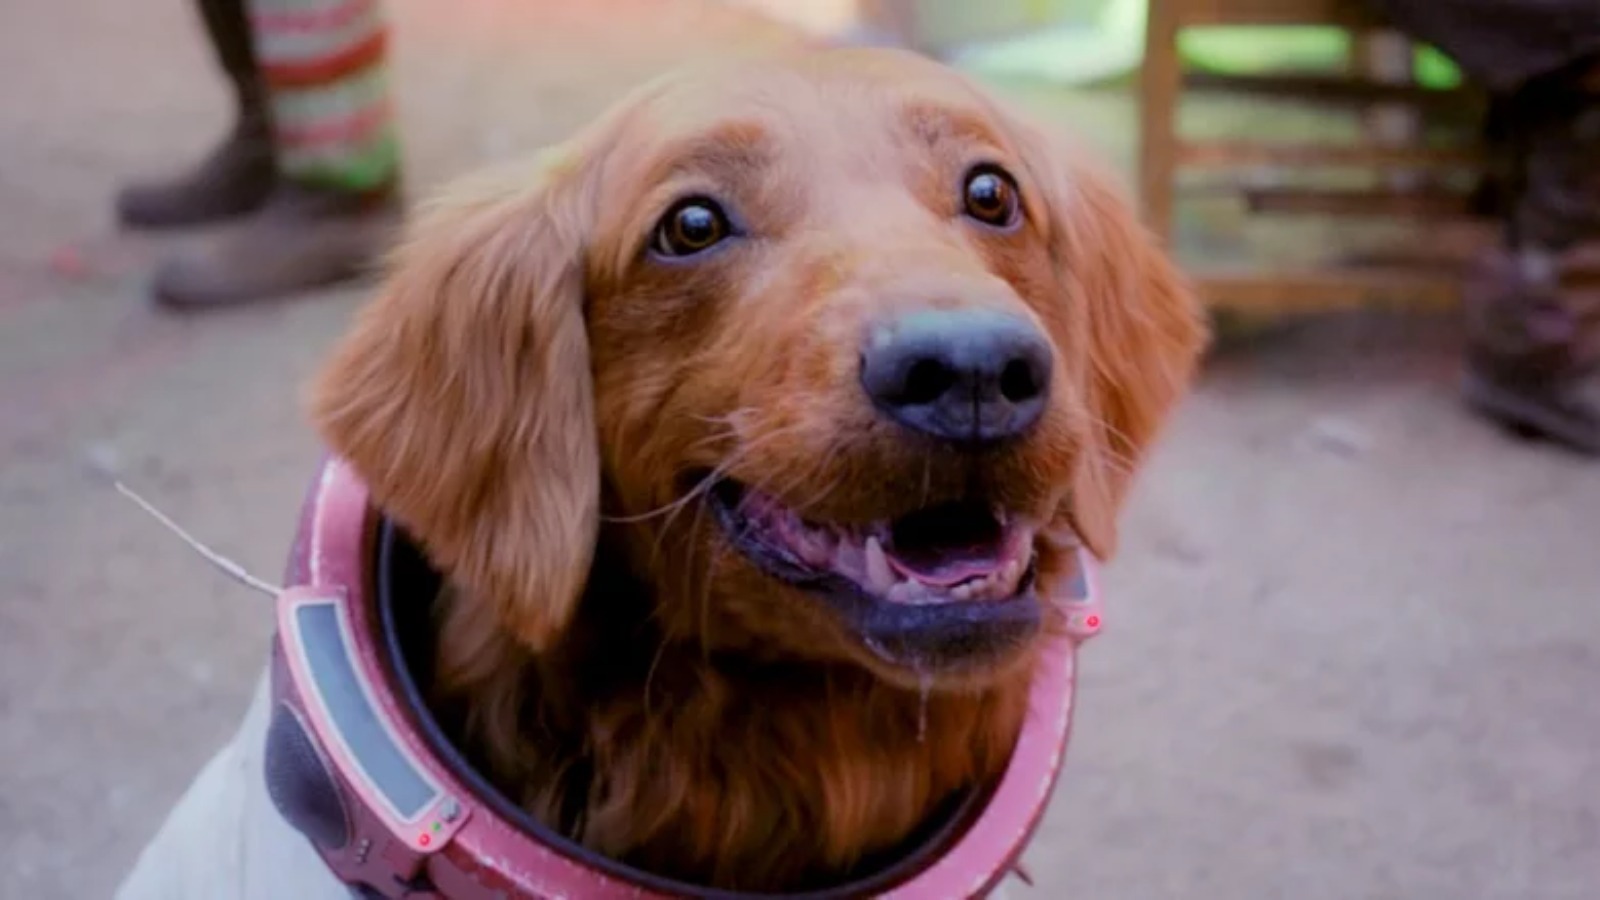 Guardians of the Galaxy Vol. Cosmo's 3 is based on the tragic true story of Laika The Space Dog